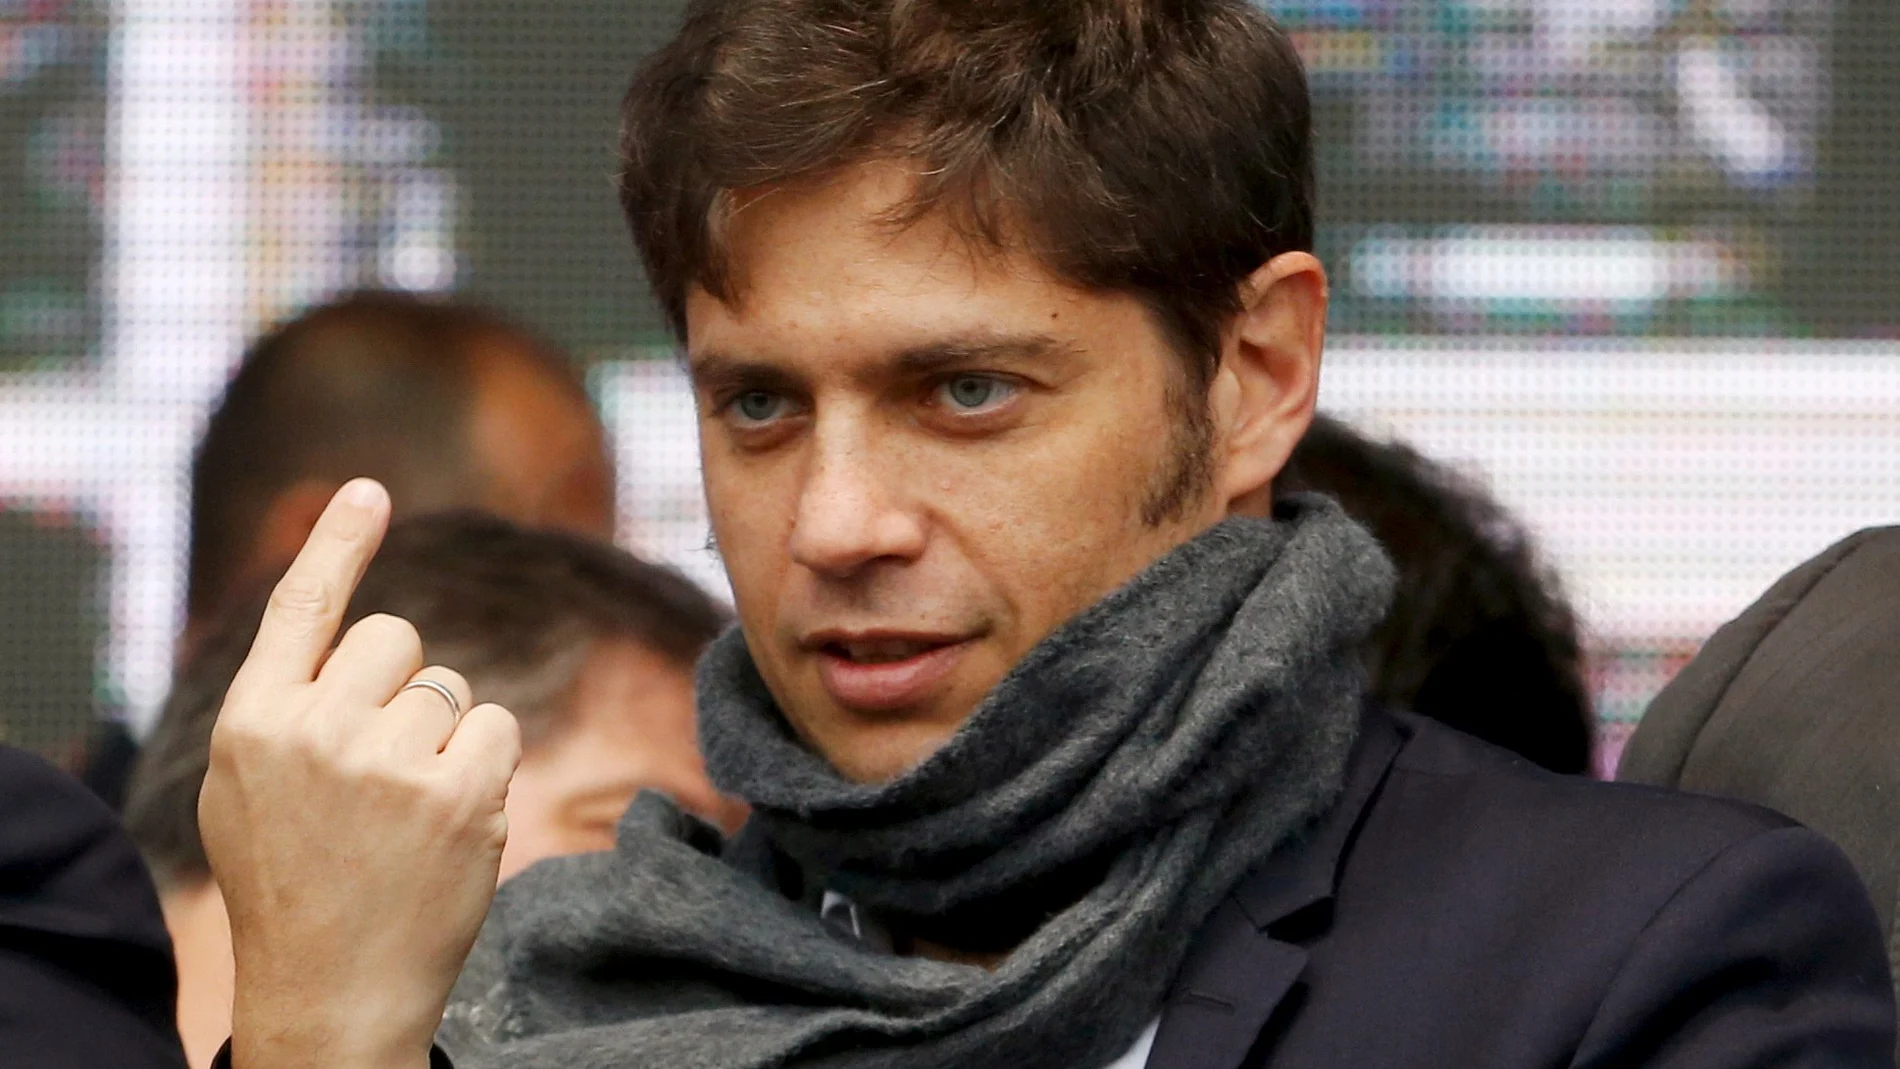 FILE PHOTO: File photo: Buenos Aires province governor, Axel Kicillof is seen at an event in Buenos Aires, Argentina, Sept, 9, 2015.